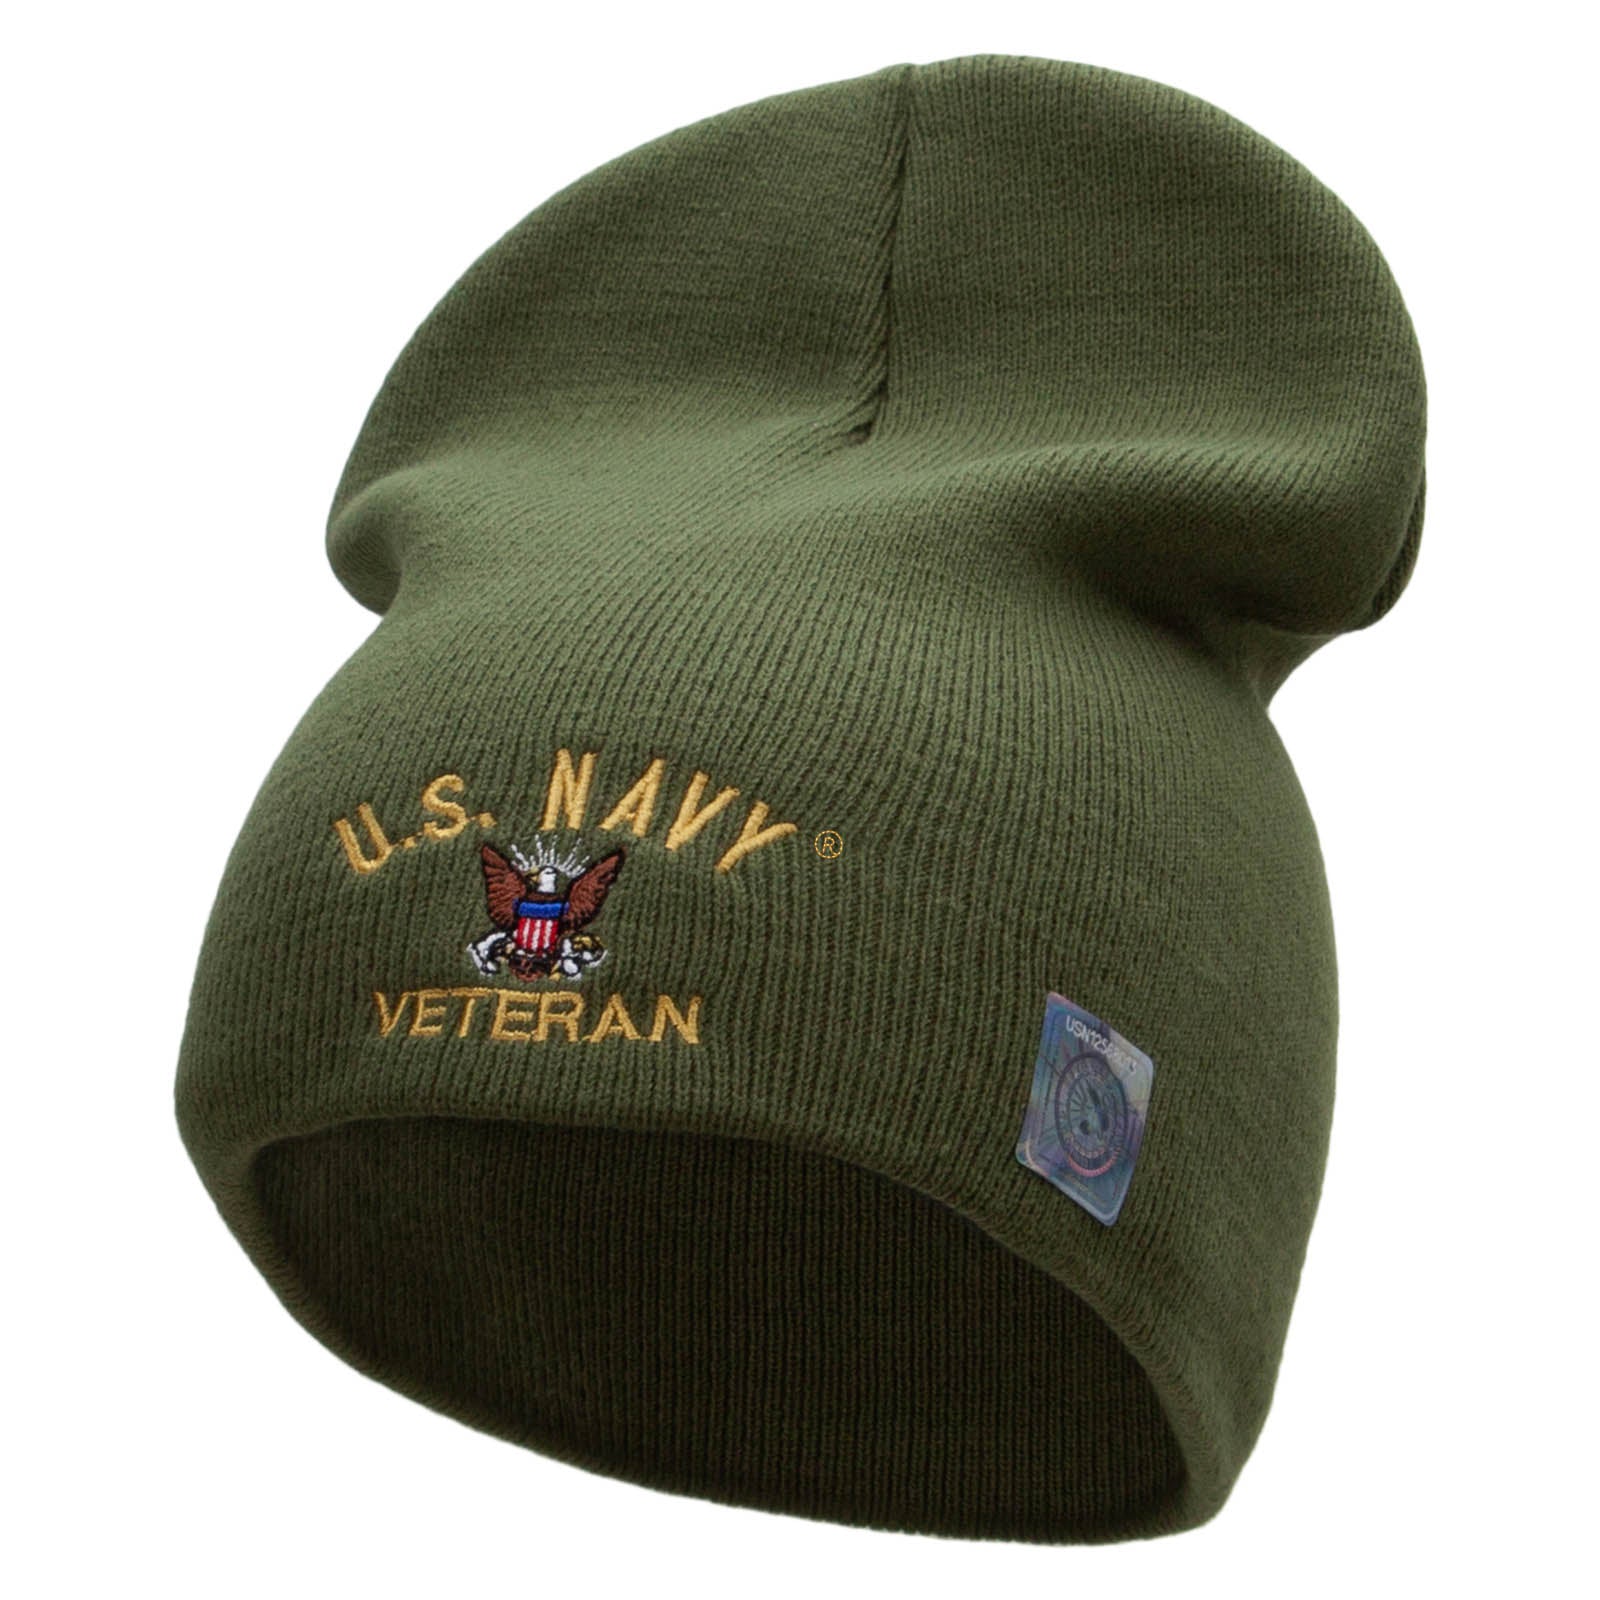 Licensed US Navy Veteran Military Embroidered Short Beanie Made in USA - Olive OSFM